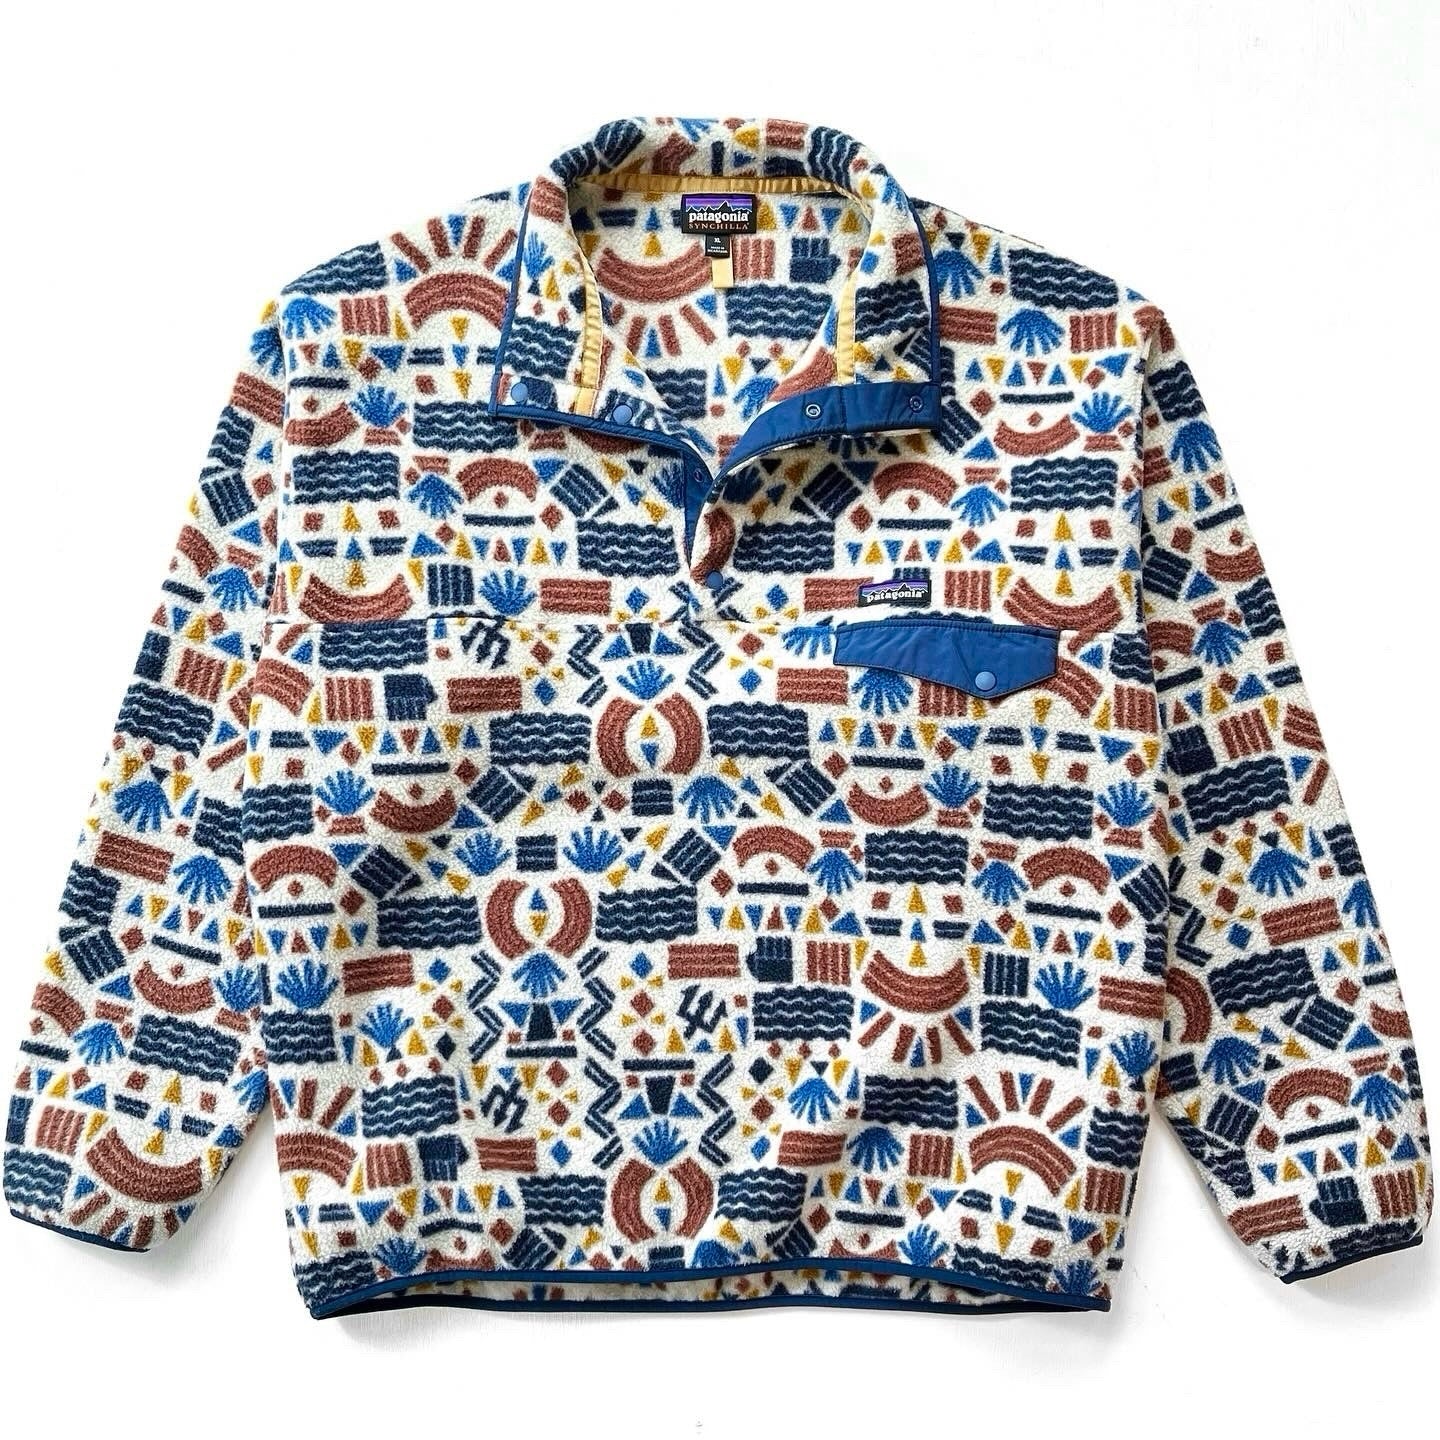 2019 Patagonia Printed Synchilla Snap-T, Protected Peaks: Multi (XL)